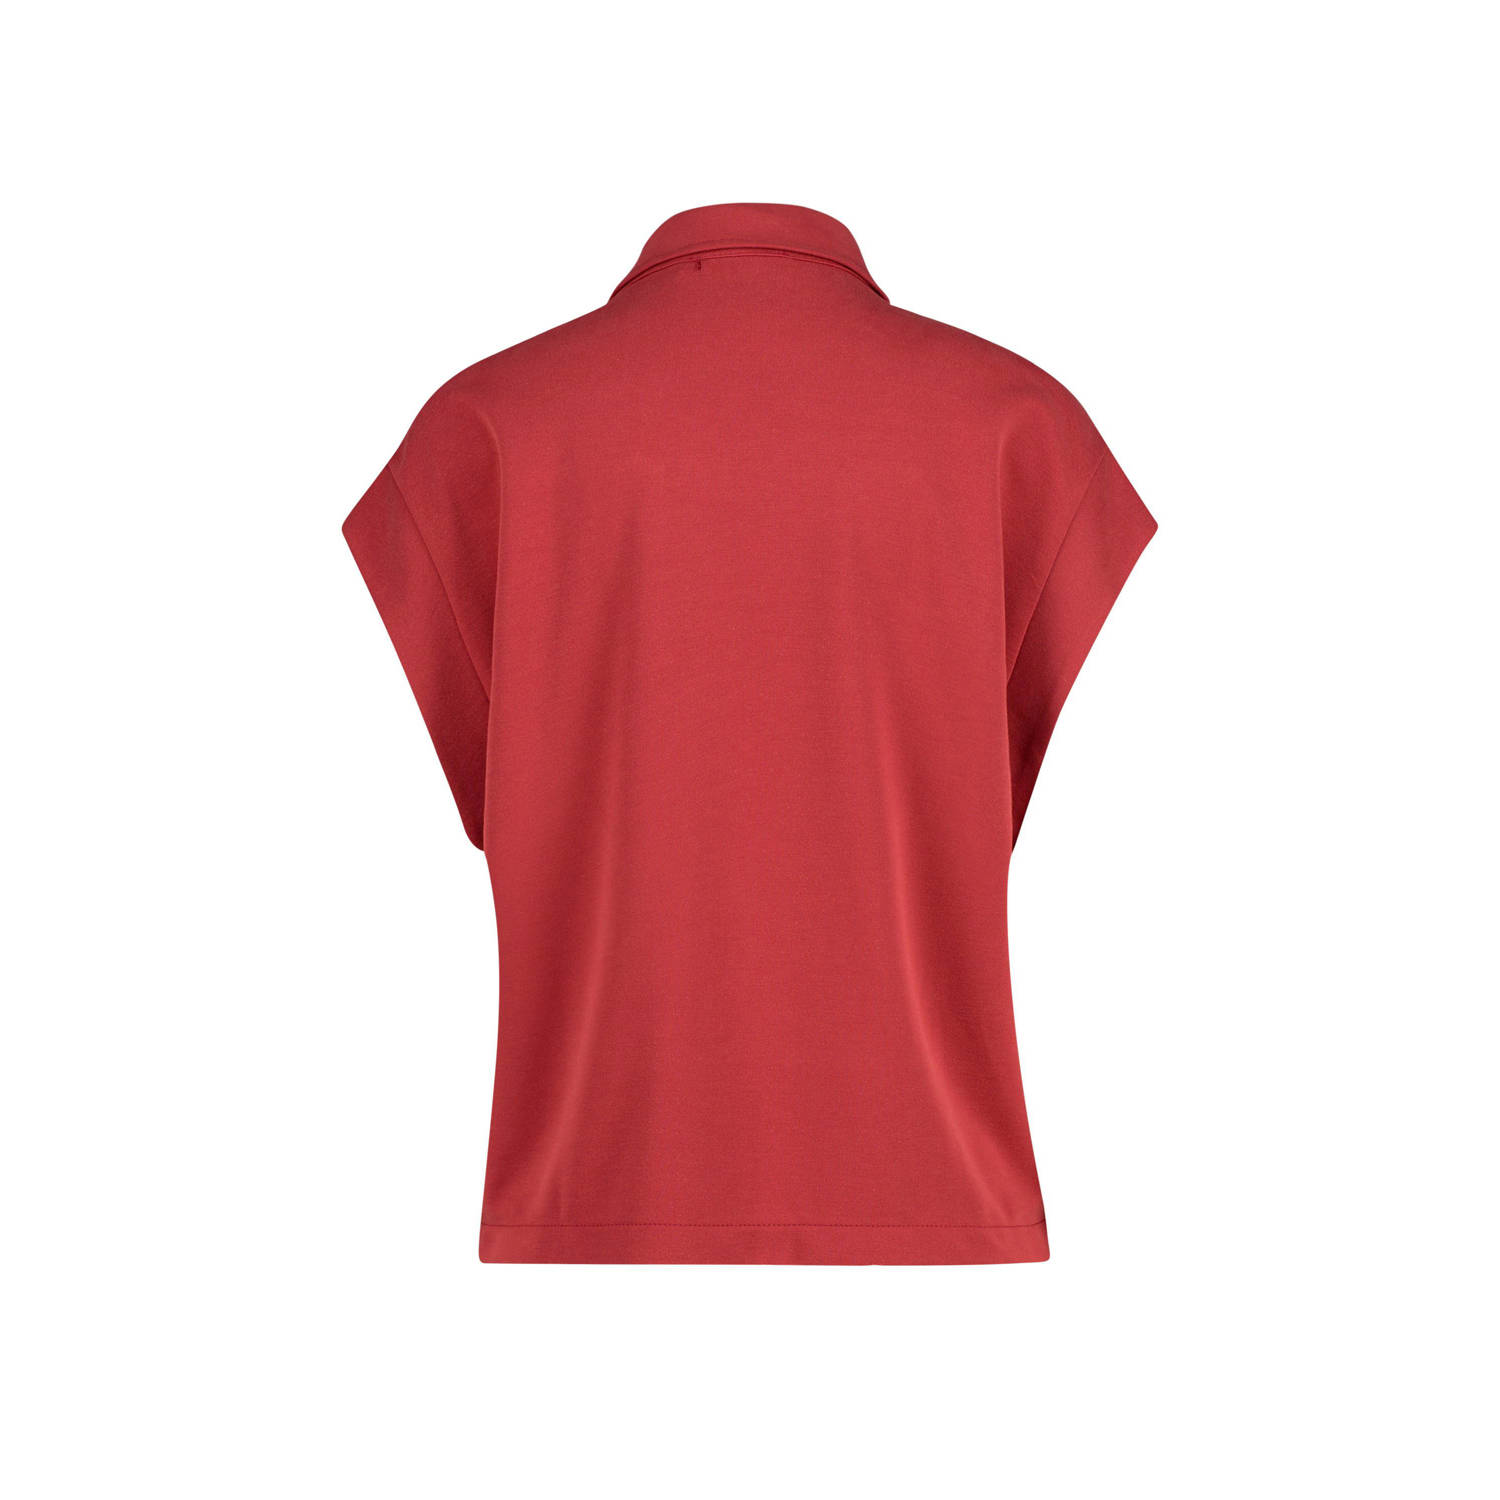 Expresso jersey blousetop rood